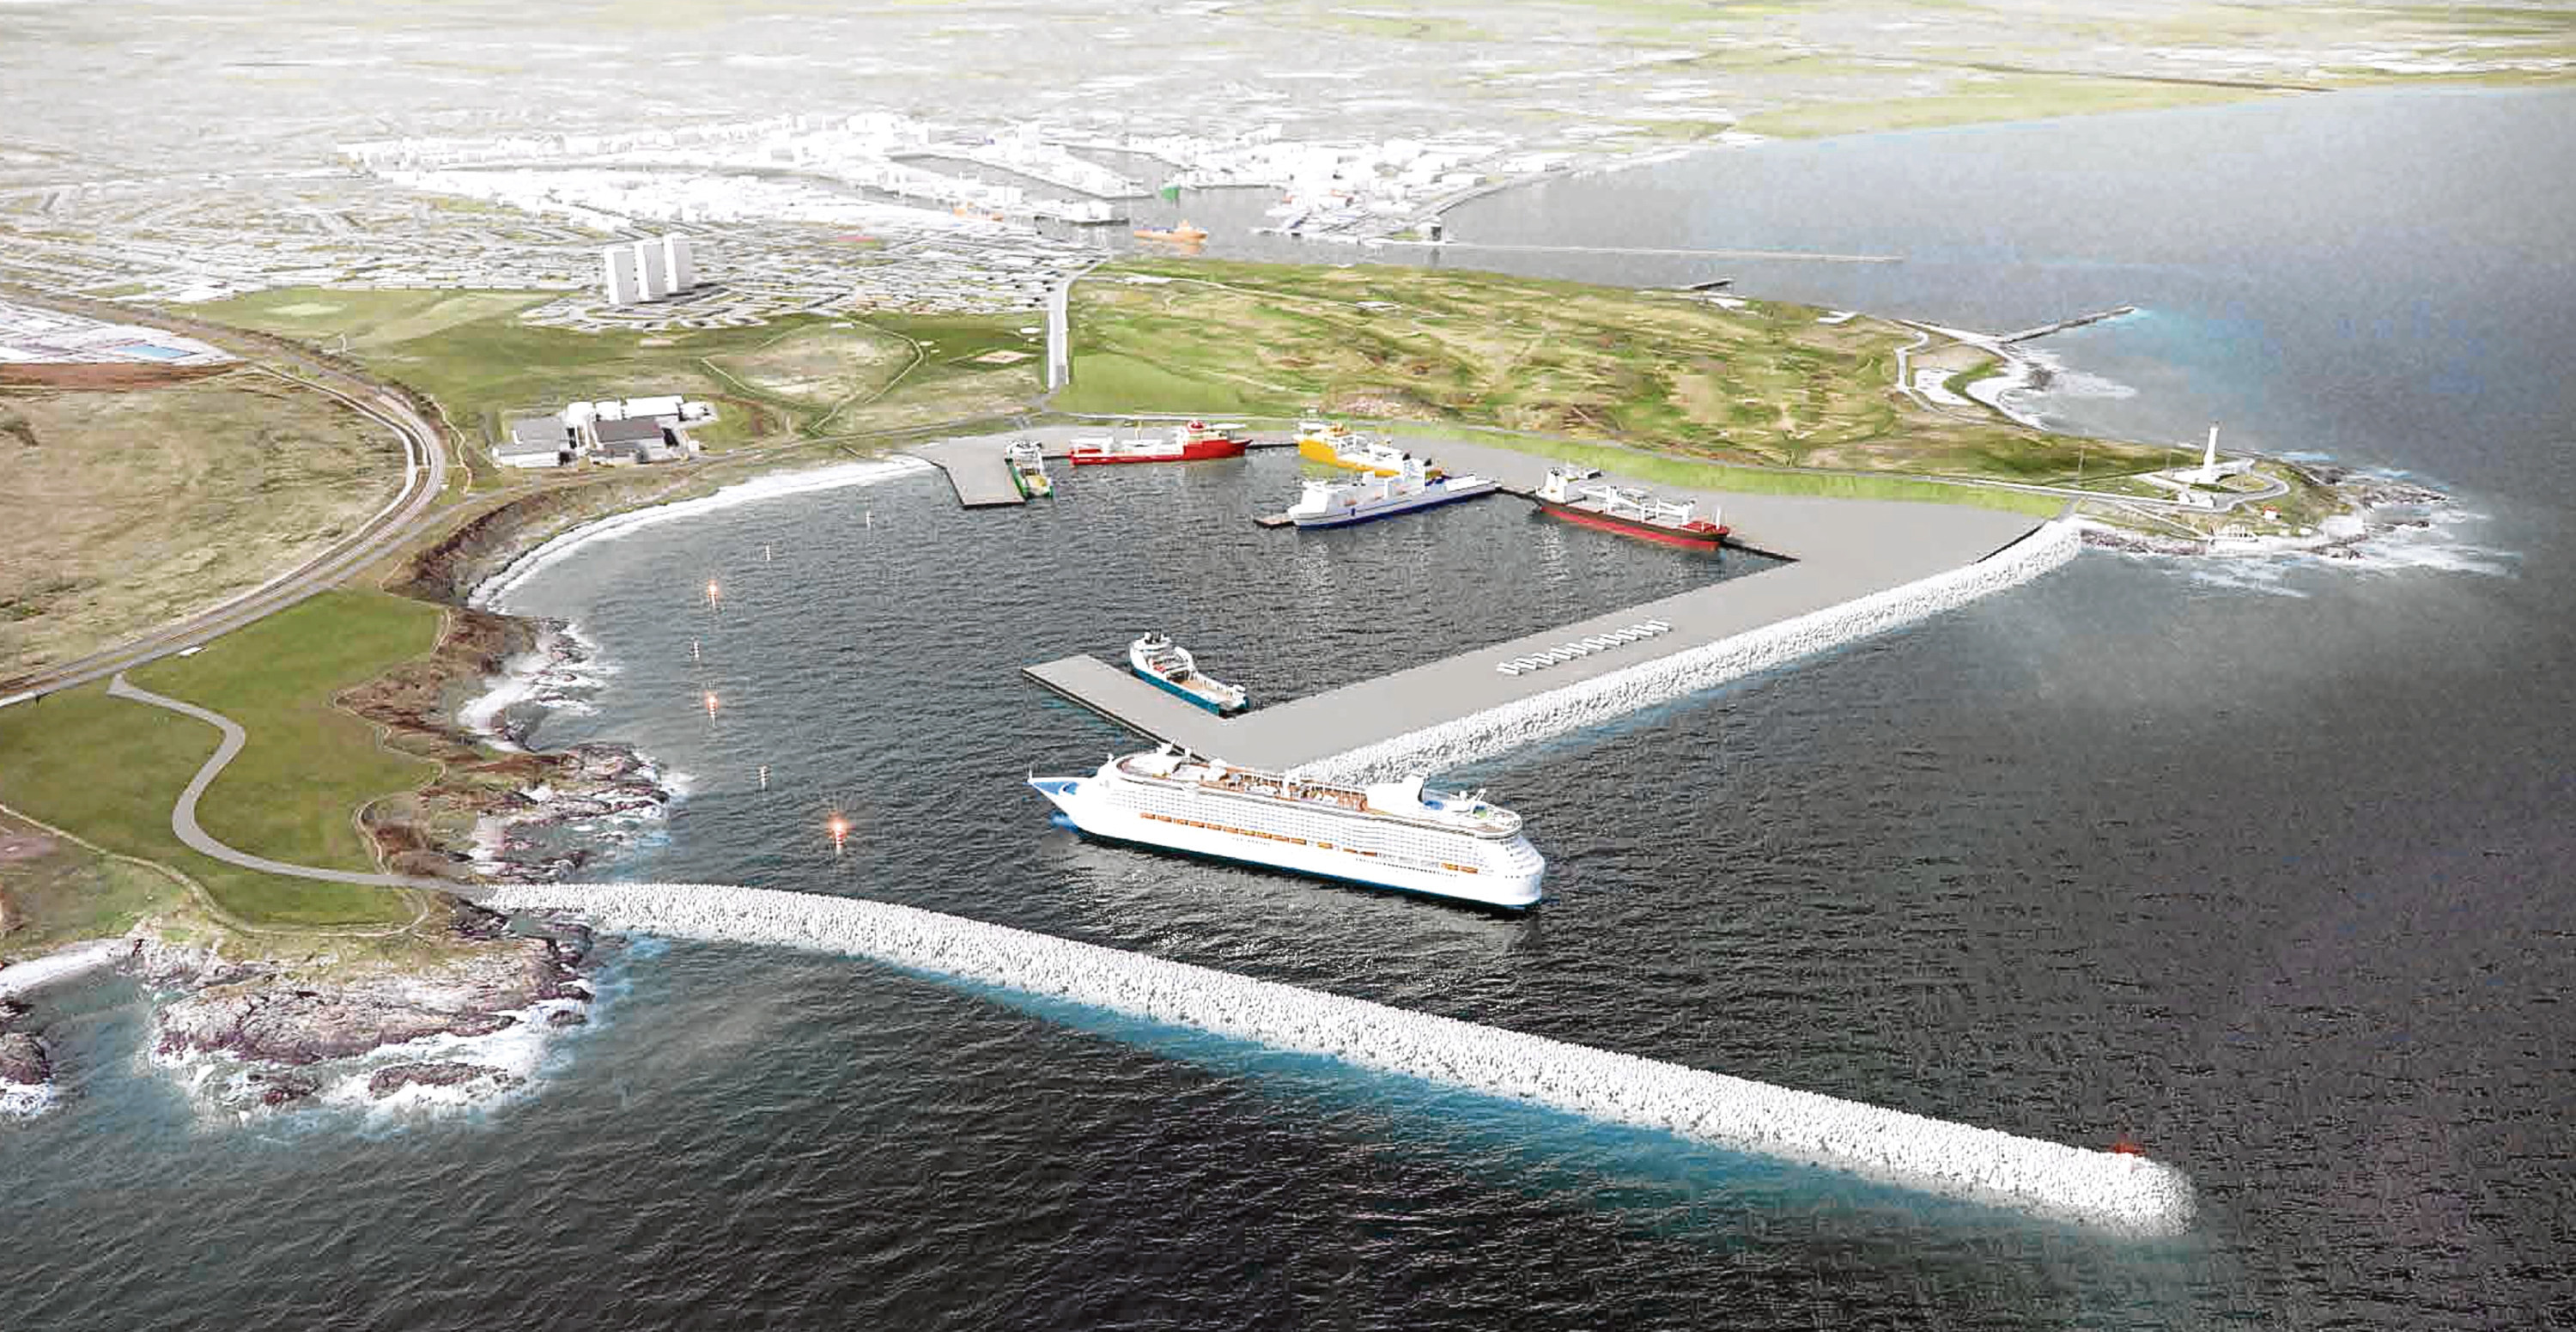 Artist impression of the proposed harbour at Nigg Bay



(SUBMITTED)